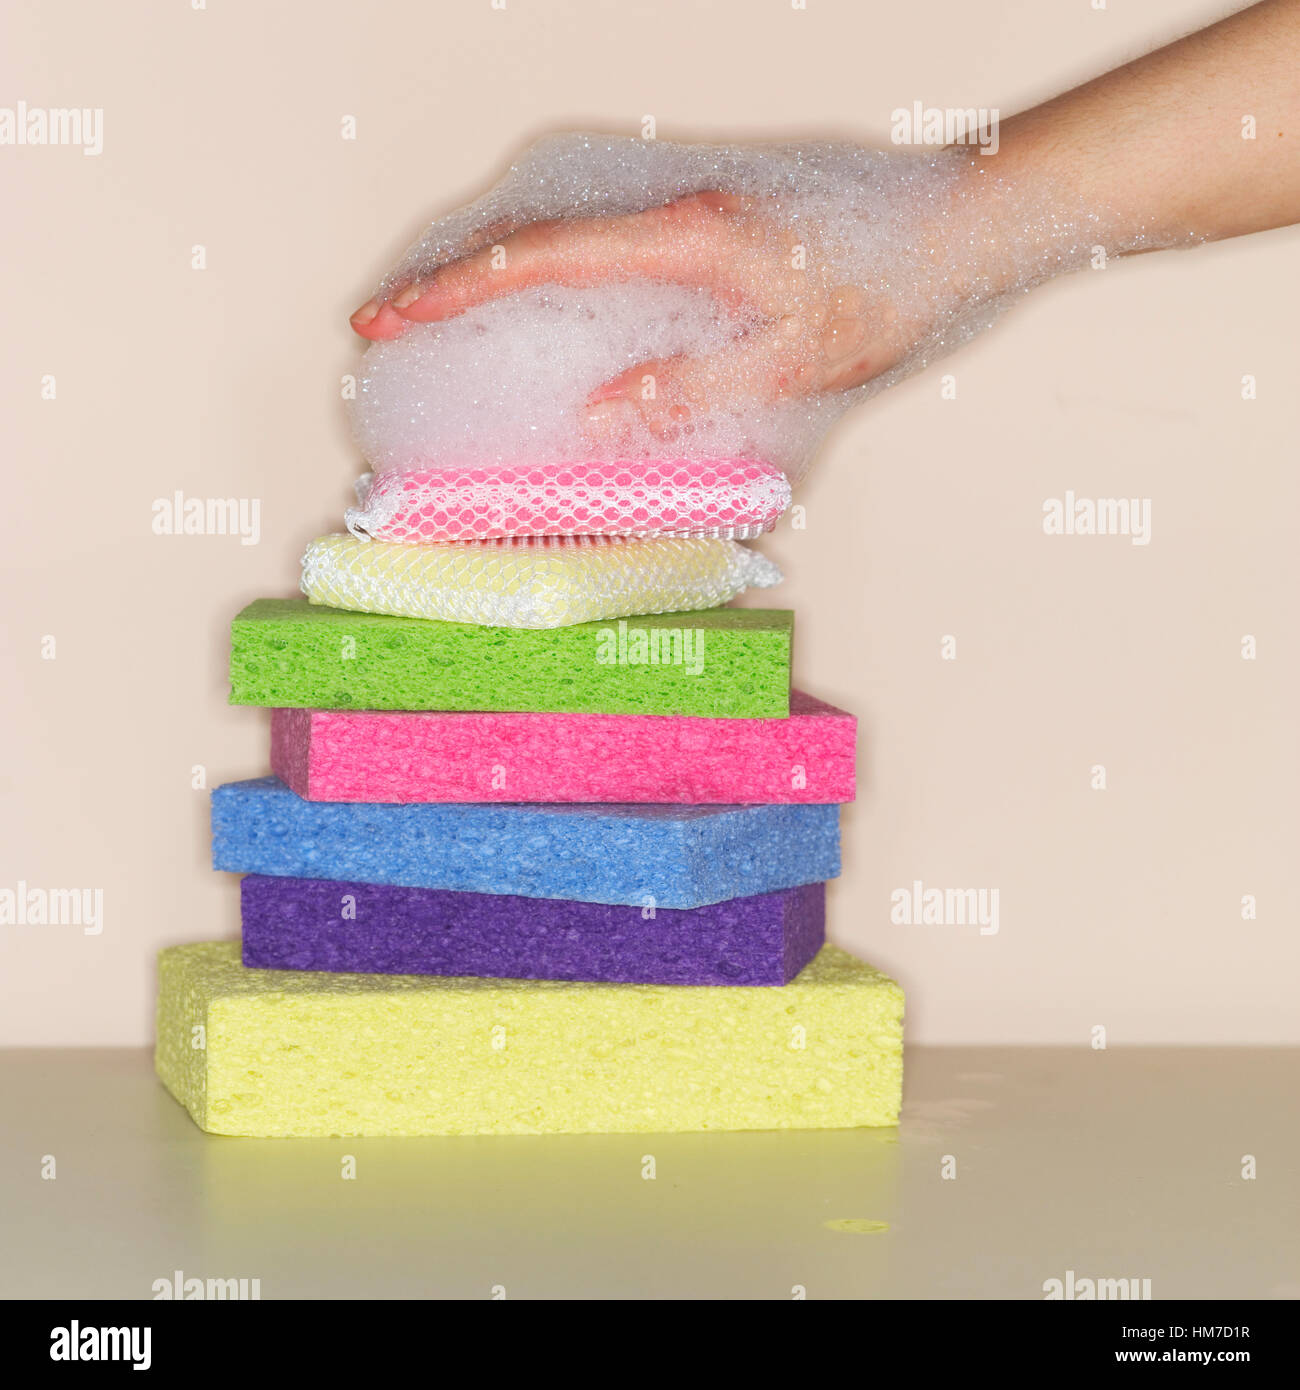 Female hand covered in foam on stack of sponges Stock Photo